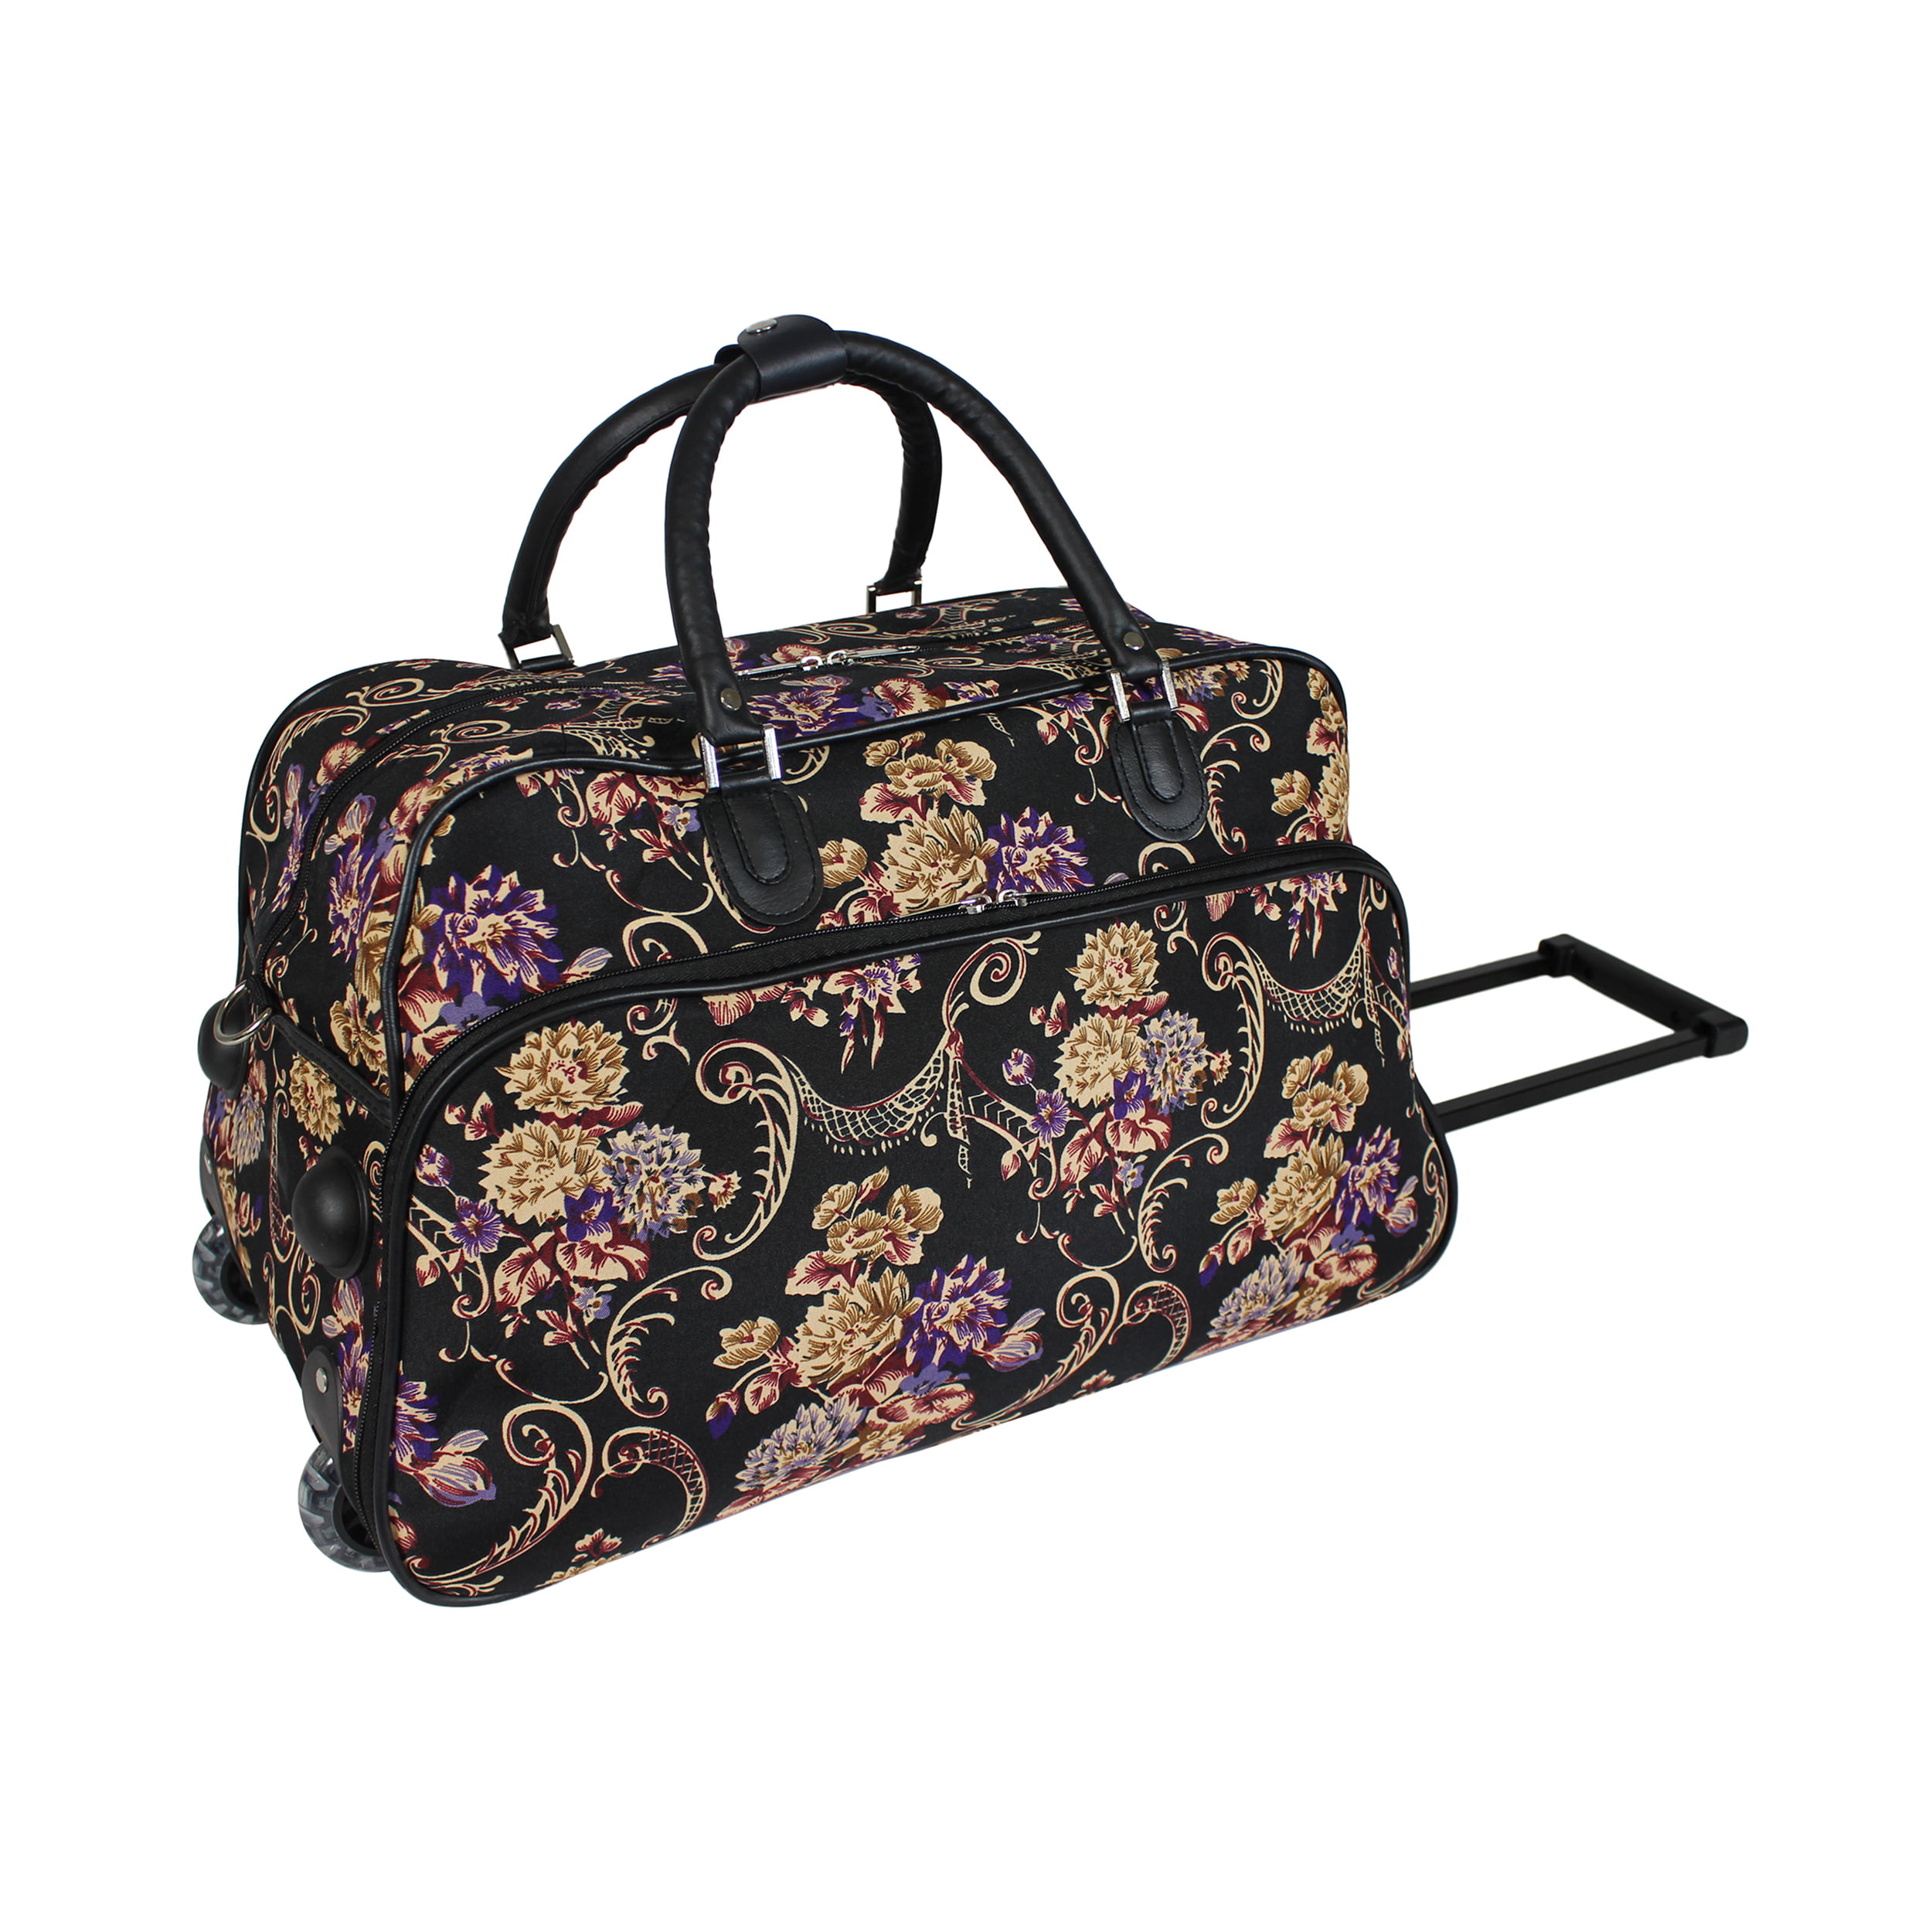 World Traveler Classic Floral 21-in. Carry-On Rolling Duffel Bag - www.bagsaleusa.com